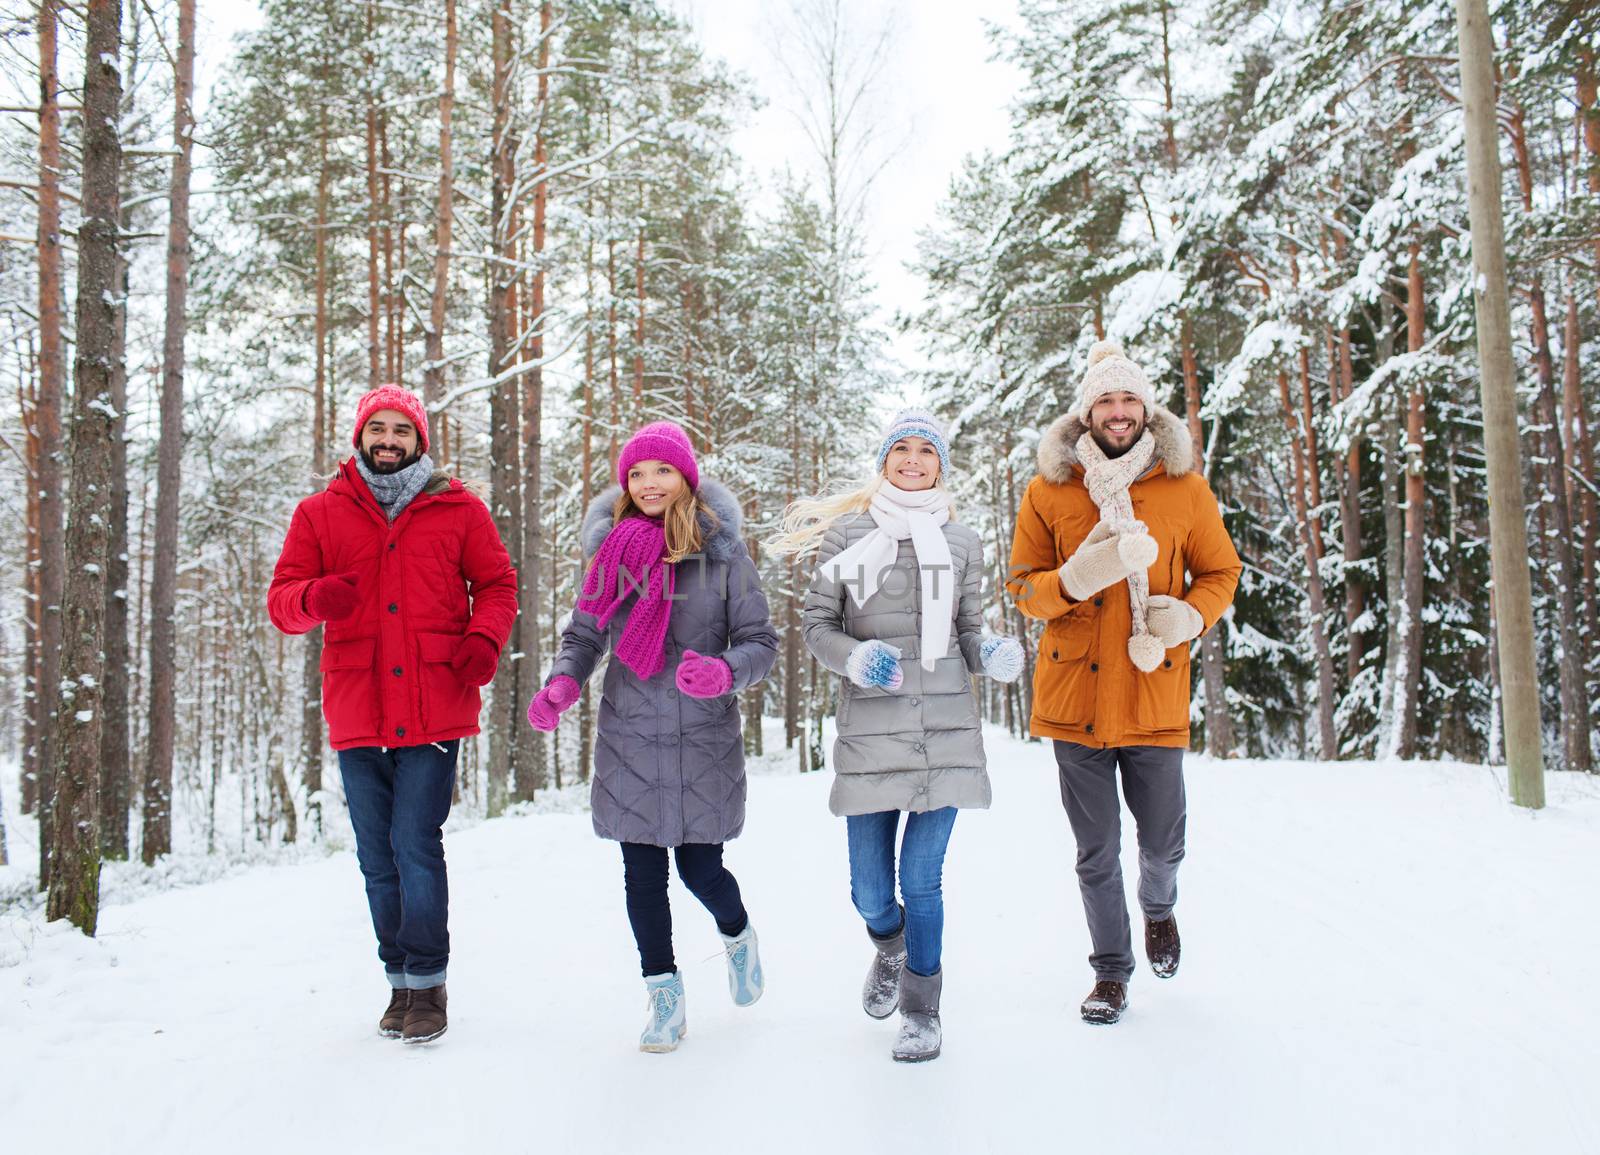 love, relationship, season, friendship and people concept - group of smiling men and women running in winter forest